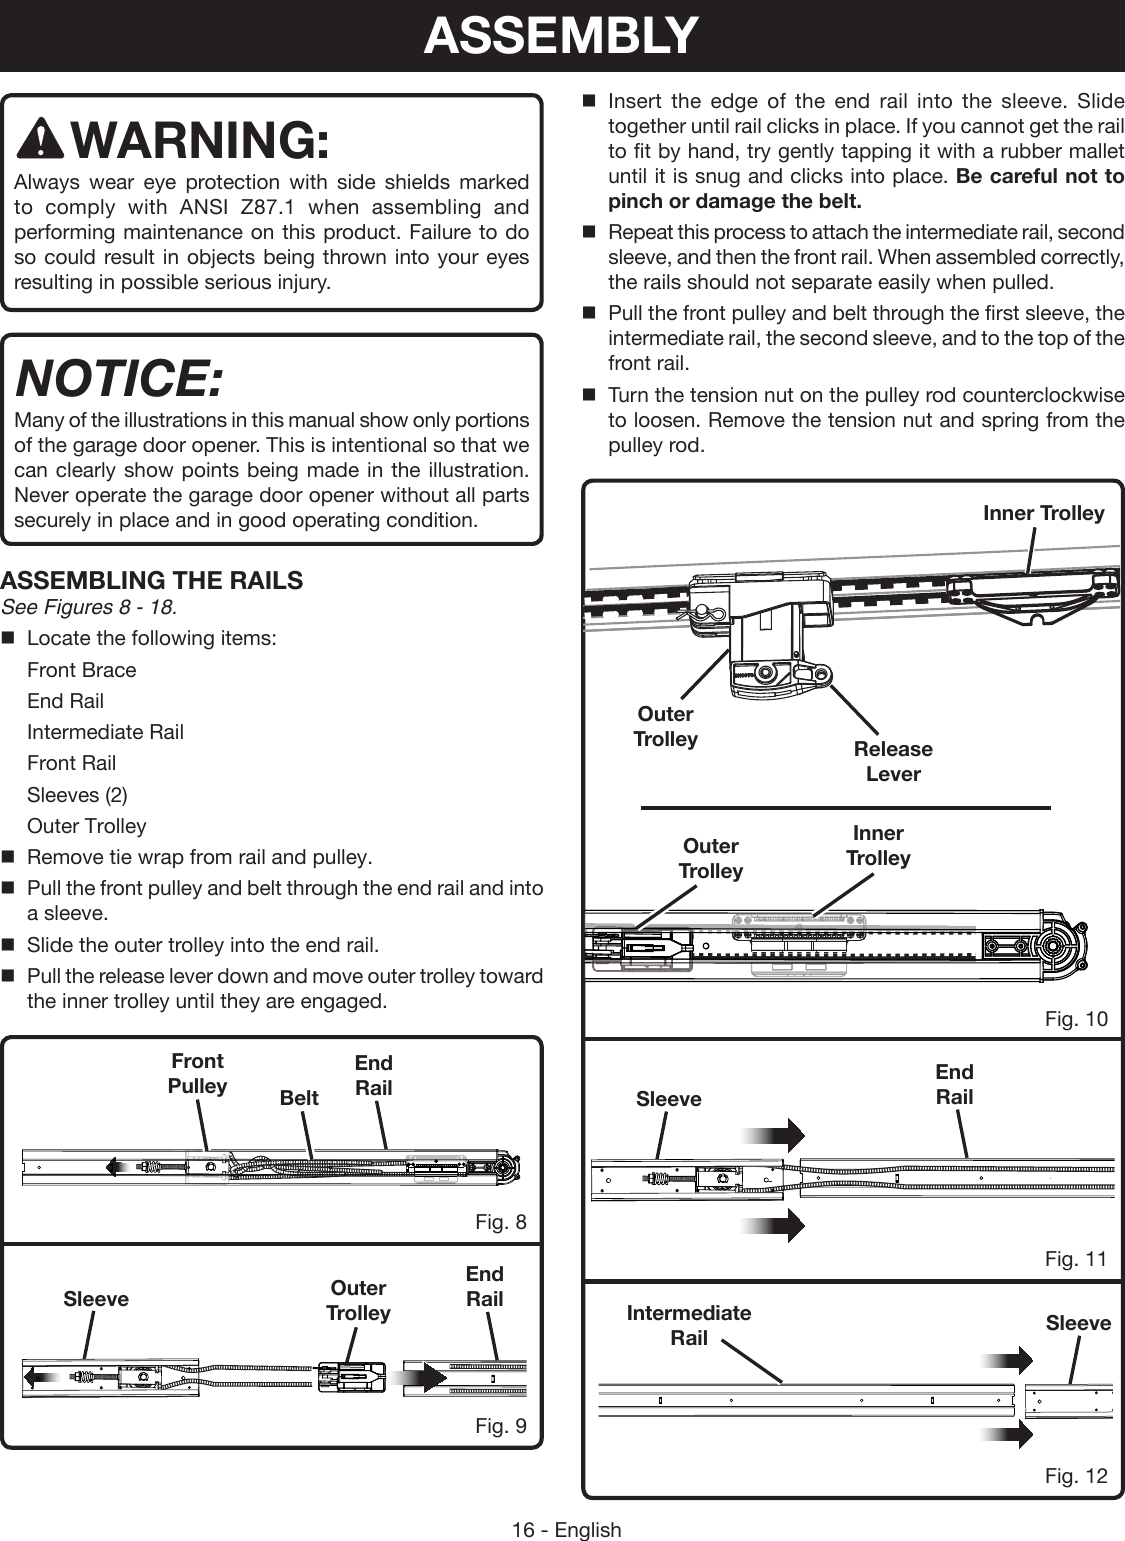 16 - EnglishSleeveSleeveSleeveEnd RailEnd RailFig. 11Fig. 8Fig. 9Fig. 10Fig. 12Intermediate RailEnd RailFront Pulley BeltOuter TrolleyASSEMBLYWARNING:Always wear eye protection with side shields marked to comply with ANSI Z87.1 when assembling and performing maintenance on this product. Failure to do so could result in objects being thrown into your eyes resulting in possible serious injury.NOTICE:Many of the illustrations in this manual show only portions of the garage door opener. This is intentional so that we can clearly show points being made in the illustration. Never operate the garage door opener without all parts securely in place and in good operating condition.ASSEMBLING THE RAILSSee Figures 8 - 18.Locate the following items:Front BraceEnd RailIntermediate RailFront RailSleeves (2)Outer TrolleyRemove tie wrap from rail and pulley.Pull the front pulley and belt through the end rail and into a sleeve.Slide the outer trolley into the end rail.Pull the release lever down and move outer trolley toward the inner trolley until they are engaged. Insert the edge of the end rail into the sleeve. Slide together until rail clicks in place. If you cannot get the rail to fit by hand, try gently tapping it with a rubber mallet until it is snug and clicks into place. Be careful not to pinch or damage the belt.Repeat this process to attach the intermediate rail, second sleeve, and then the front rail. When assembled correctly, the rails should not separate easily when pulled. Pull the front pulley and belt through the first sleeve, the intermediate rail, the second sleeve, and to the top of the front rail.Turn the tension nut on the pulley rod counterclockwise to loosen. Remove the tension nut and spring from the pulley rod.Release LeverOuter TrolleyOuter TrolleyInner TrolleyInner Trolley